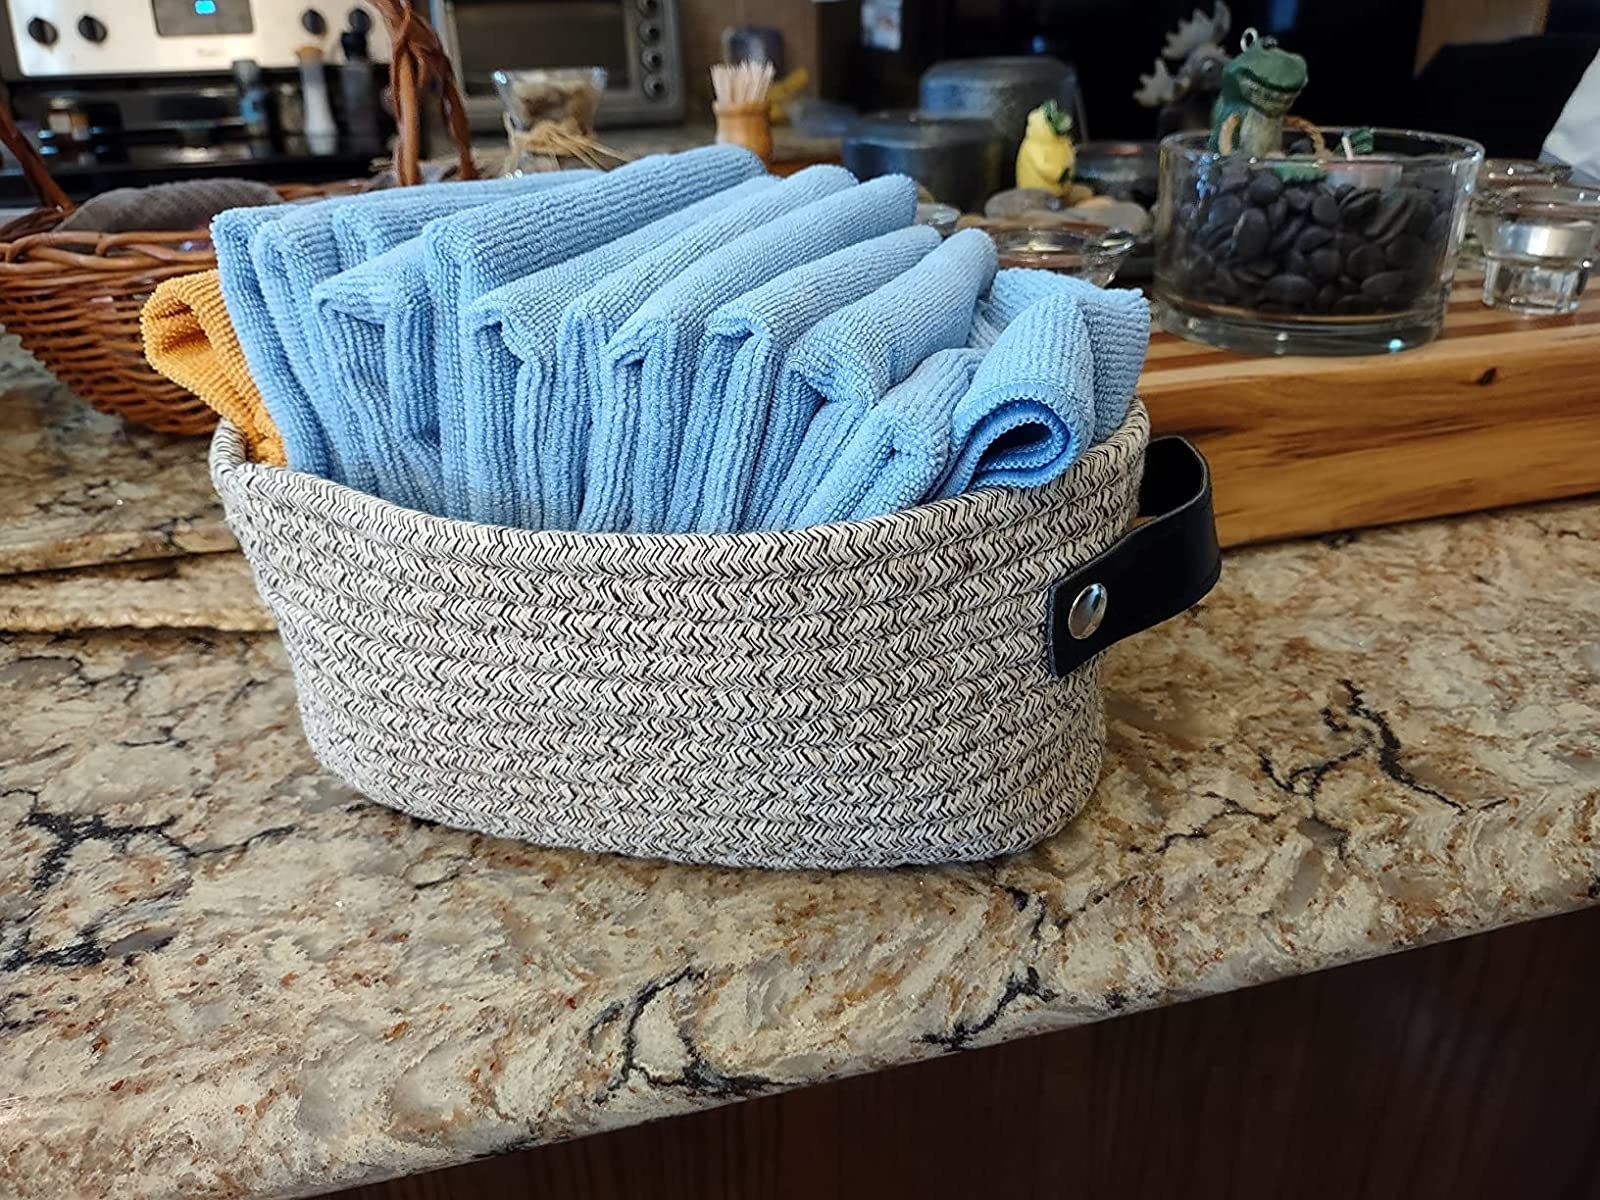 Reviewer image of basket with blue microfiber cloths in it